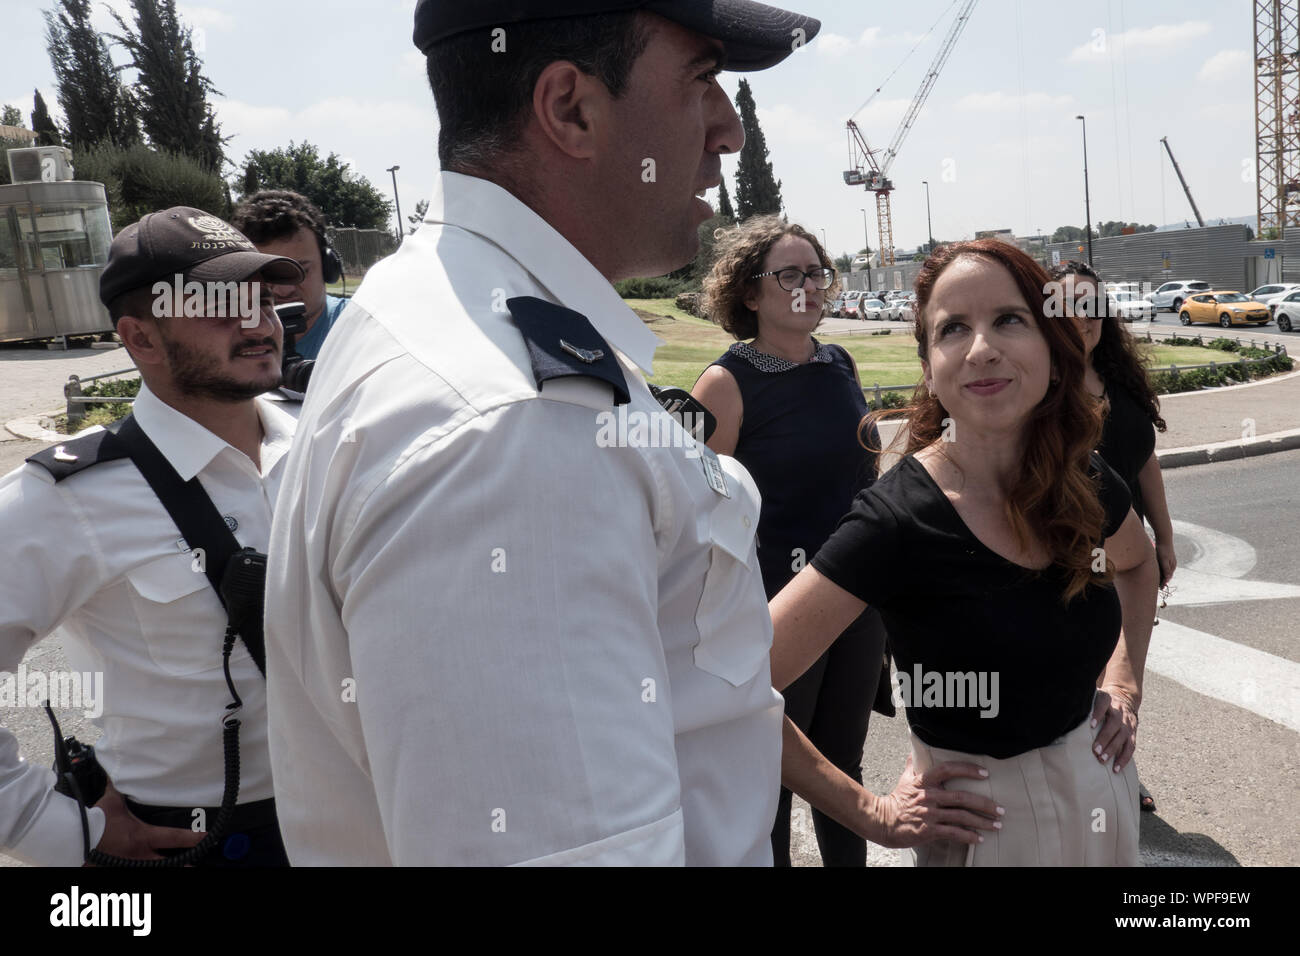 Jerusalem, Israel. 9th September, 2019. STAV SHAFFIR (R), former Labor MK and leader of 2011 Israeli social justice protests, number 2 on the the Democratic Union list, exchanges words with Knesset Guard as activists block the access road to the Israeli Parliament. Credit: Nir Alon/Alamy Live News Stock Photo